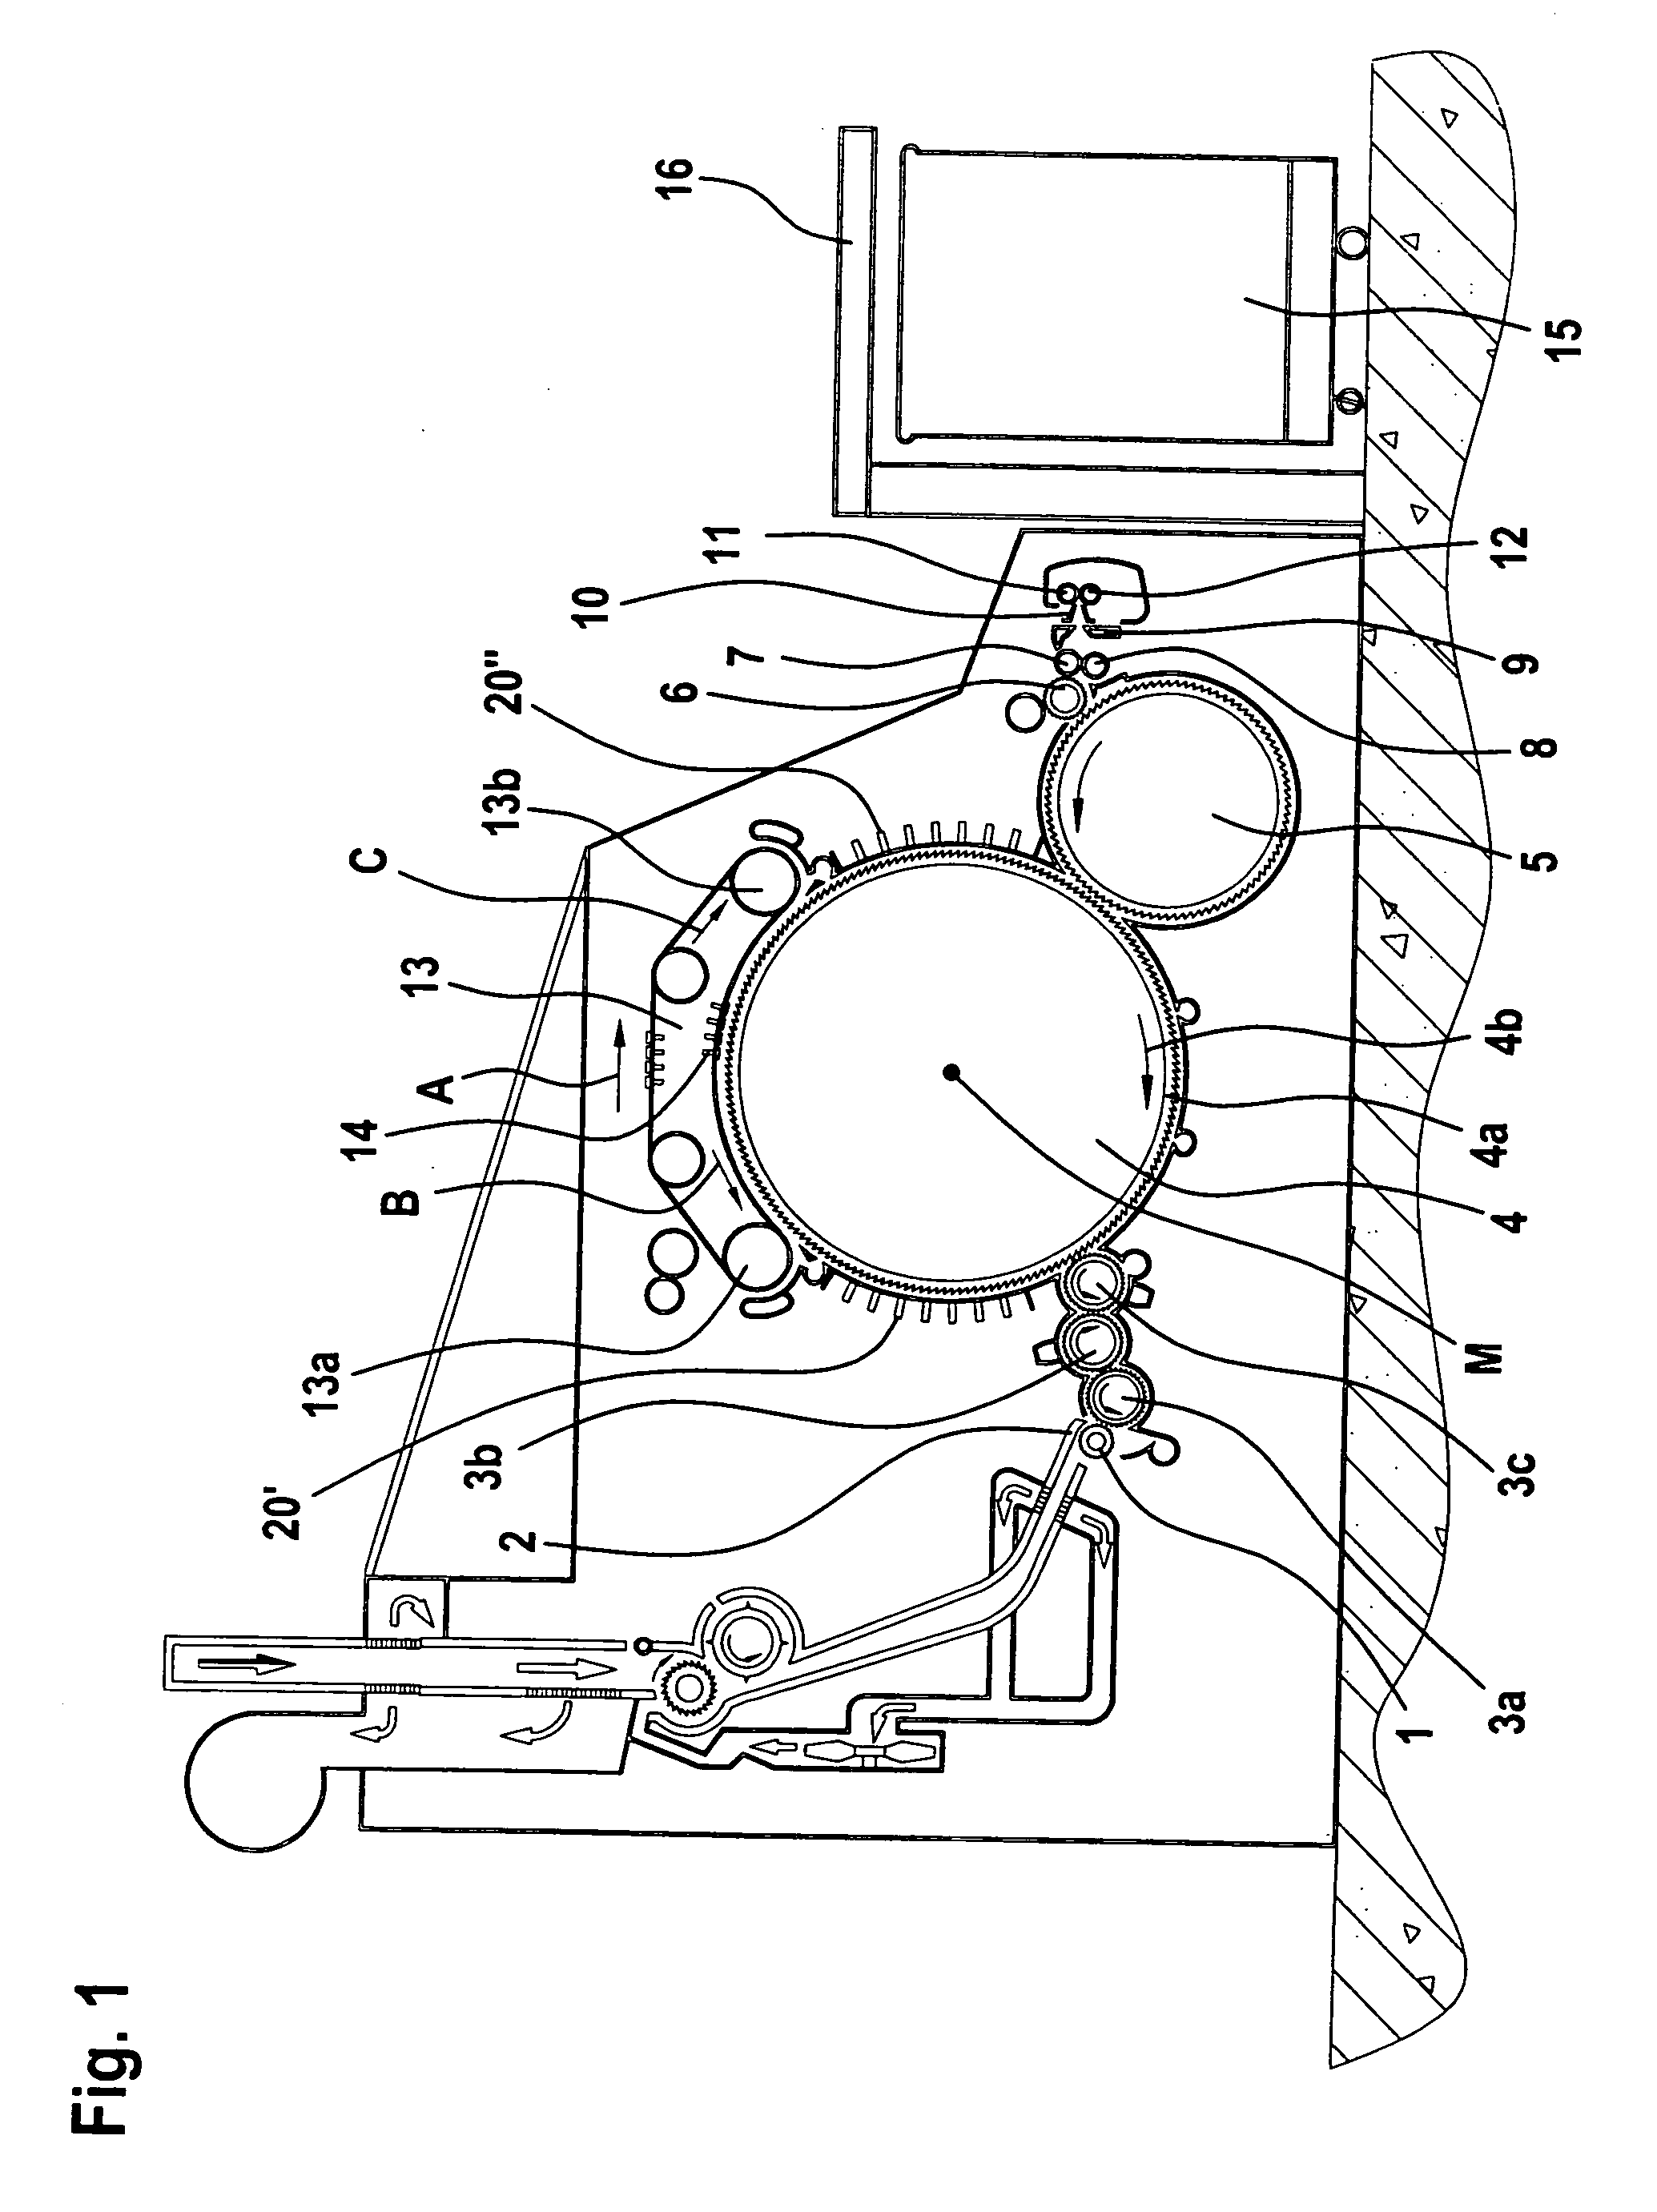 Apparatus at a flat card for cotton, synthetic fibers or the like, having a carding element